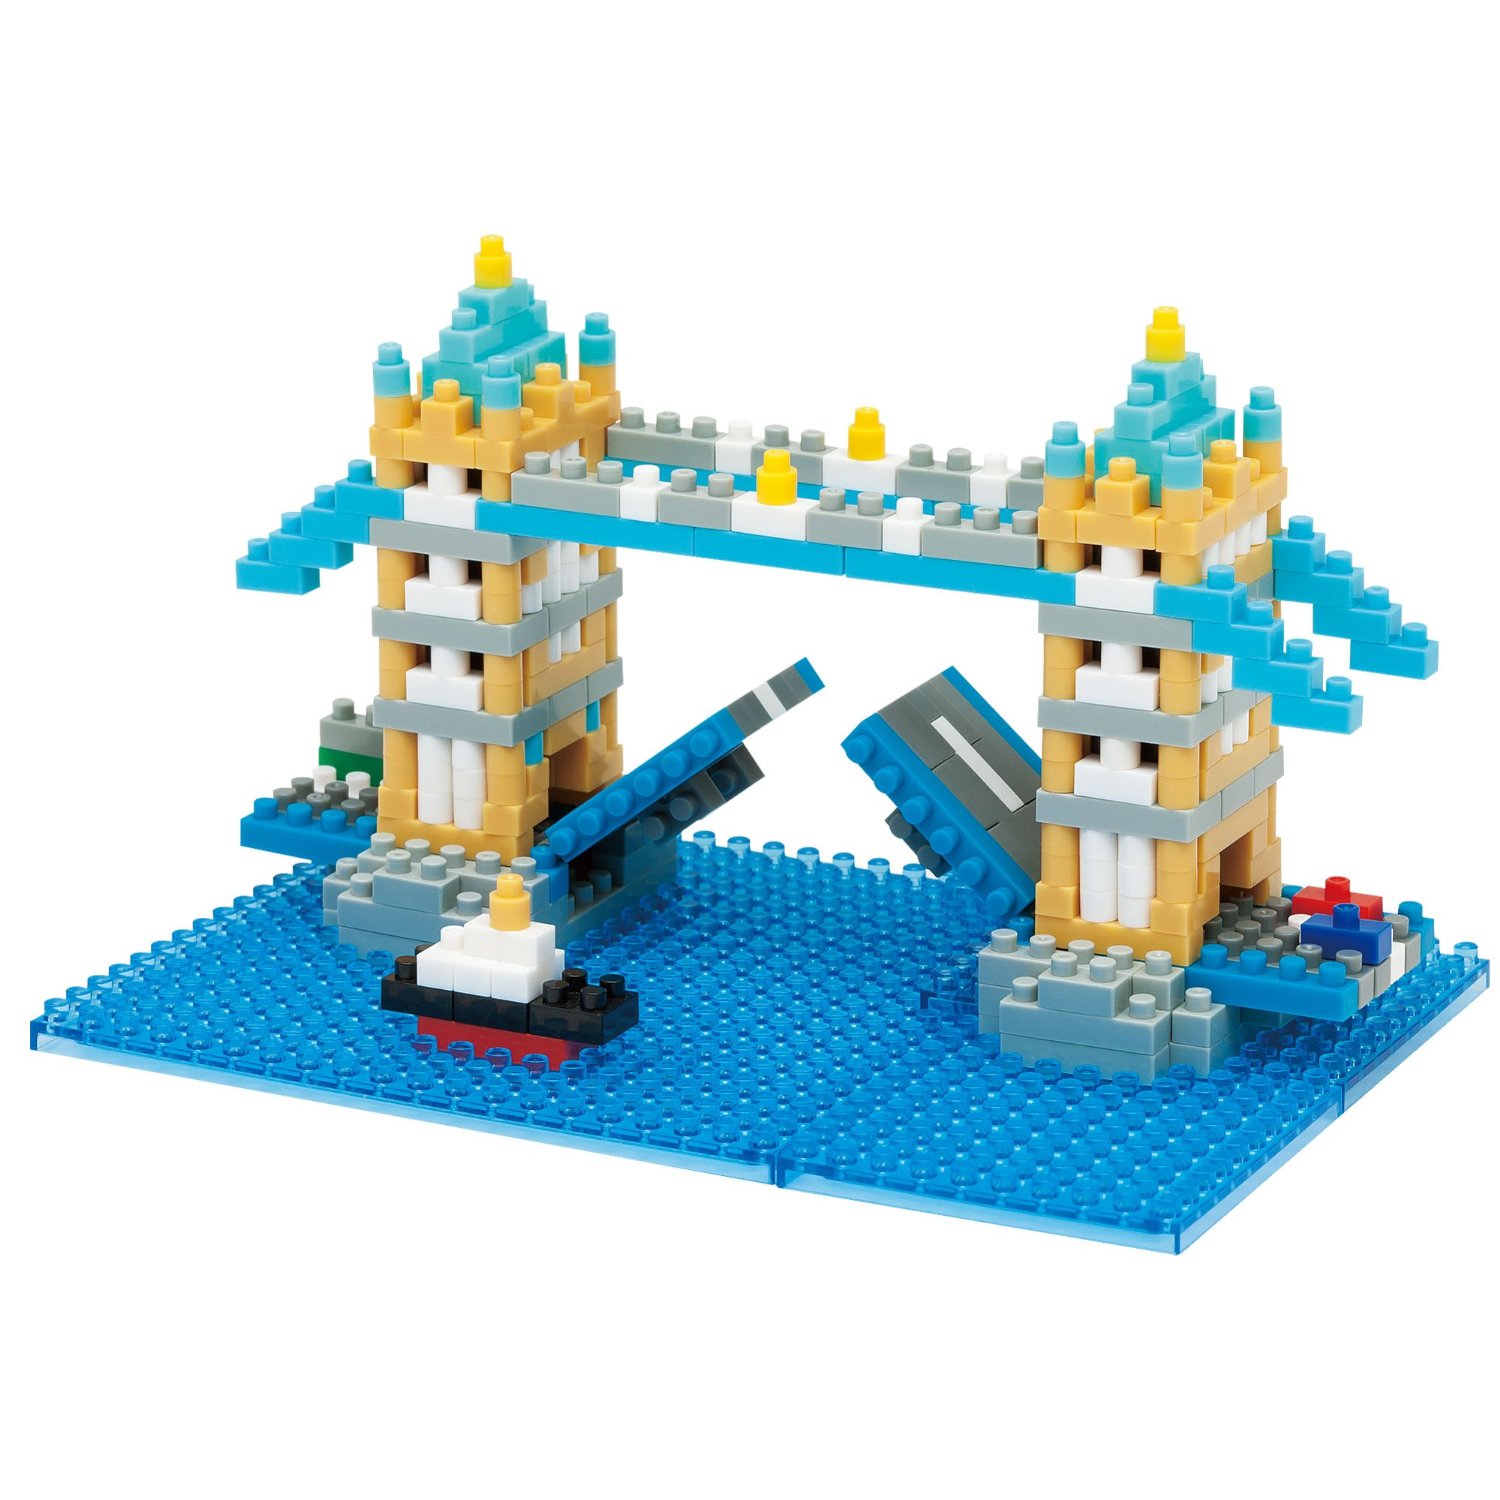 Madhouse Family Reviews: Nanoblock Sights To See London